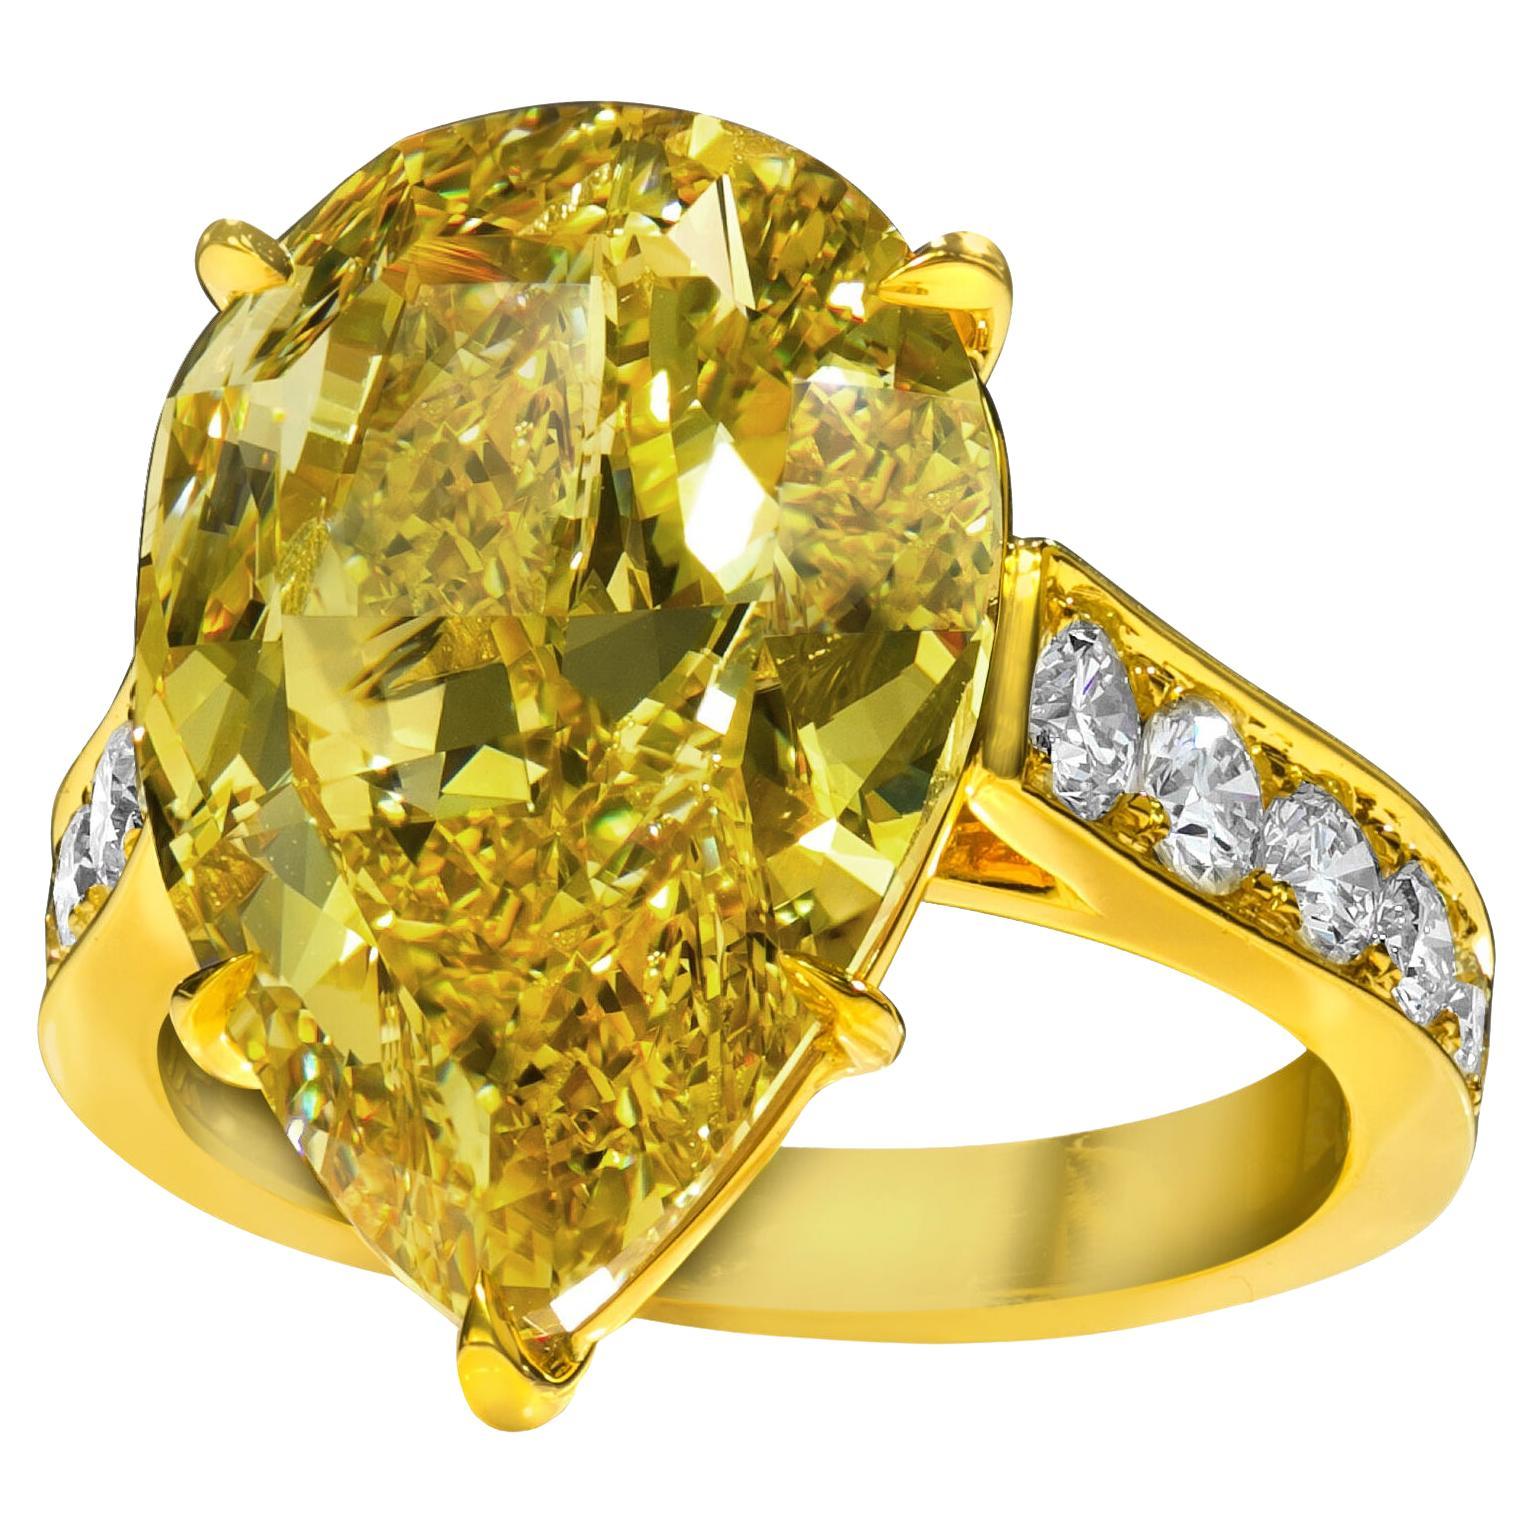 GIA Certified 10.06 Carat Pear Shape Fancy Deep Yellow Diamond Engagement Ring For Sale